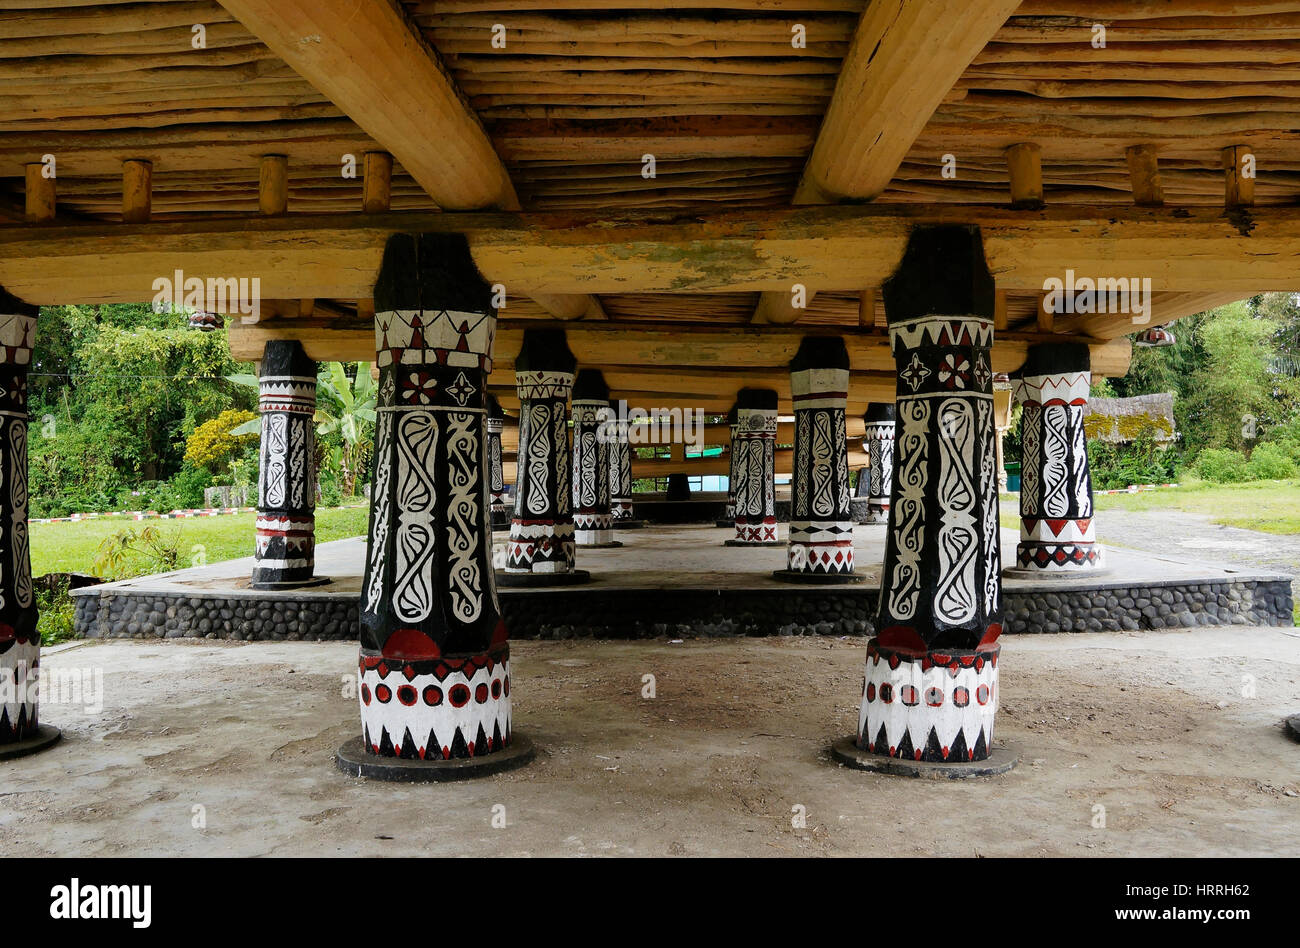 Black pillars with white drawings underneath a house at an old Batak village in Sumatra Samosir Island in the afternoon, Indonesia. Stock Photo